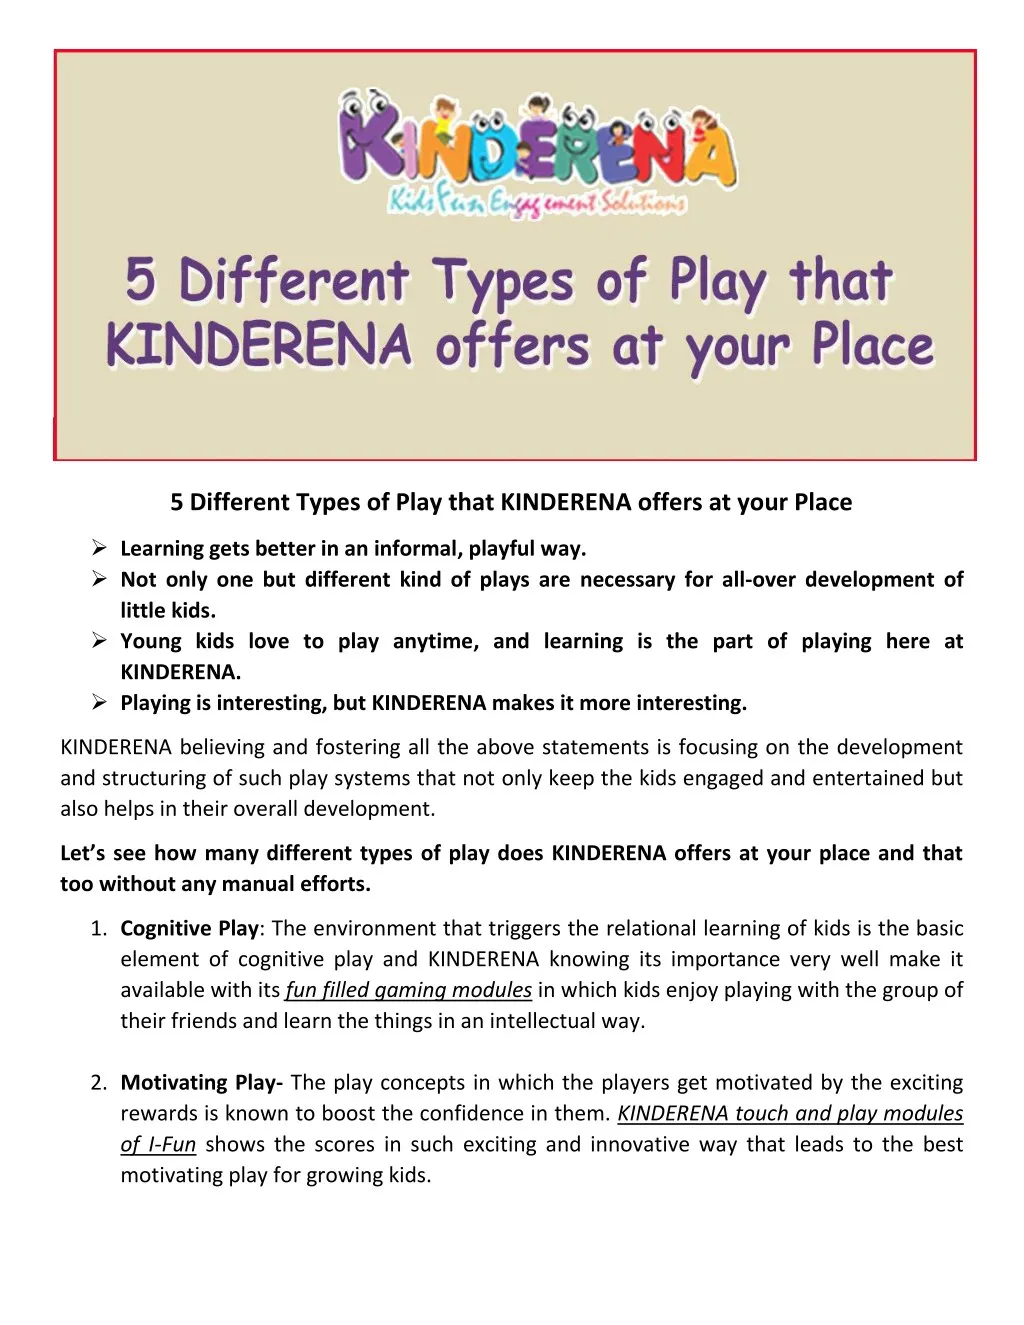 5 different types of play that kinderena offers